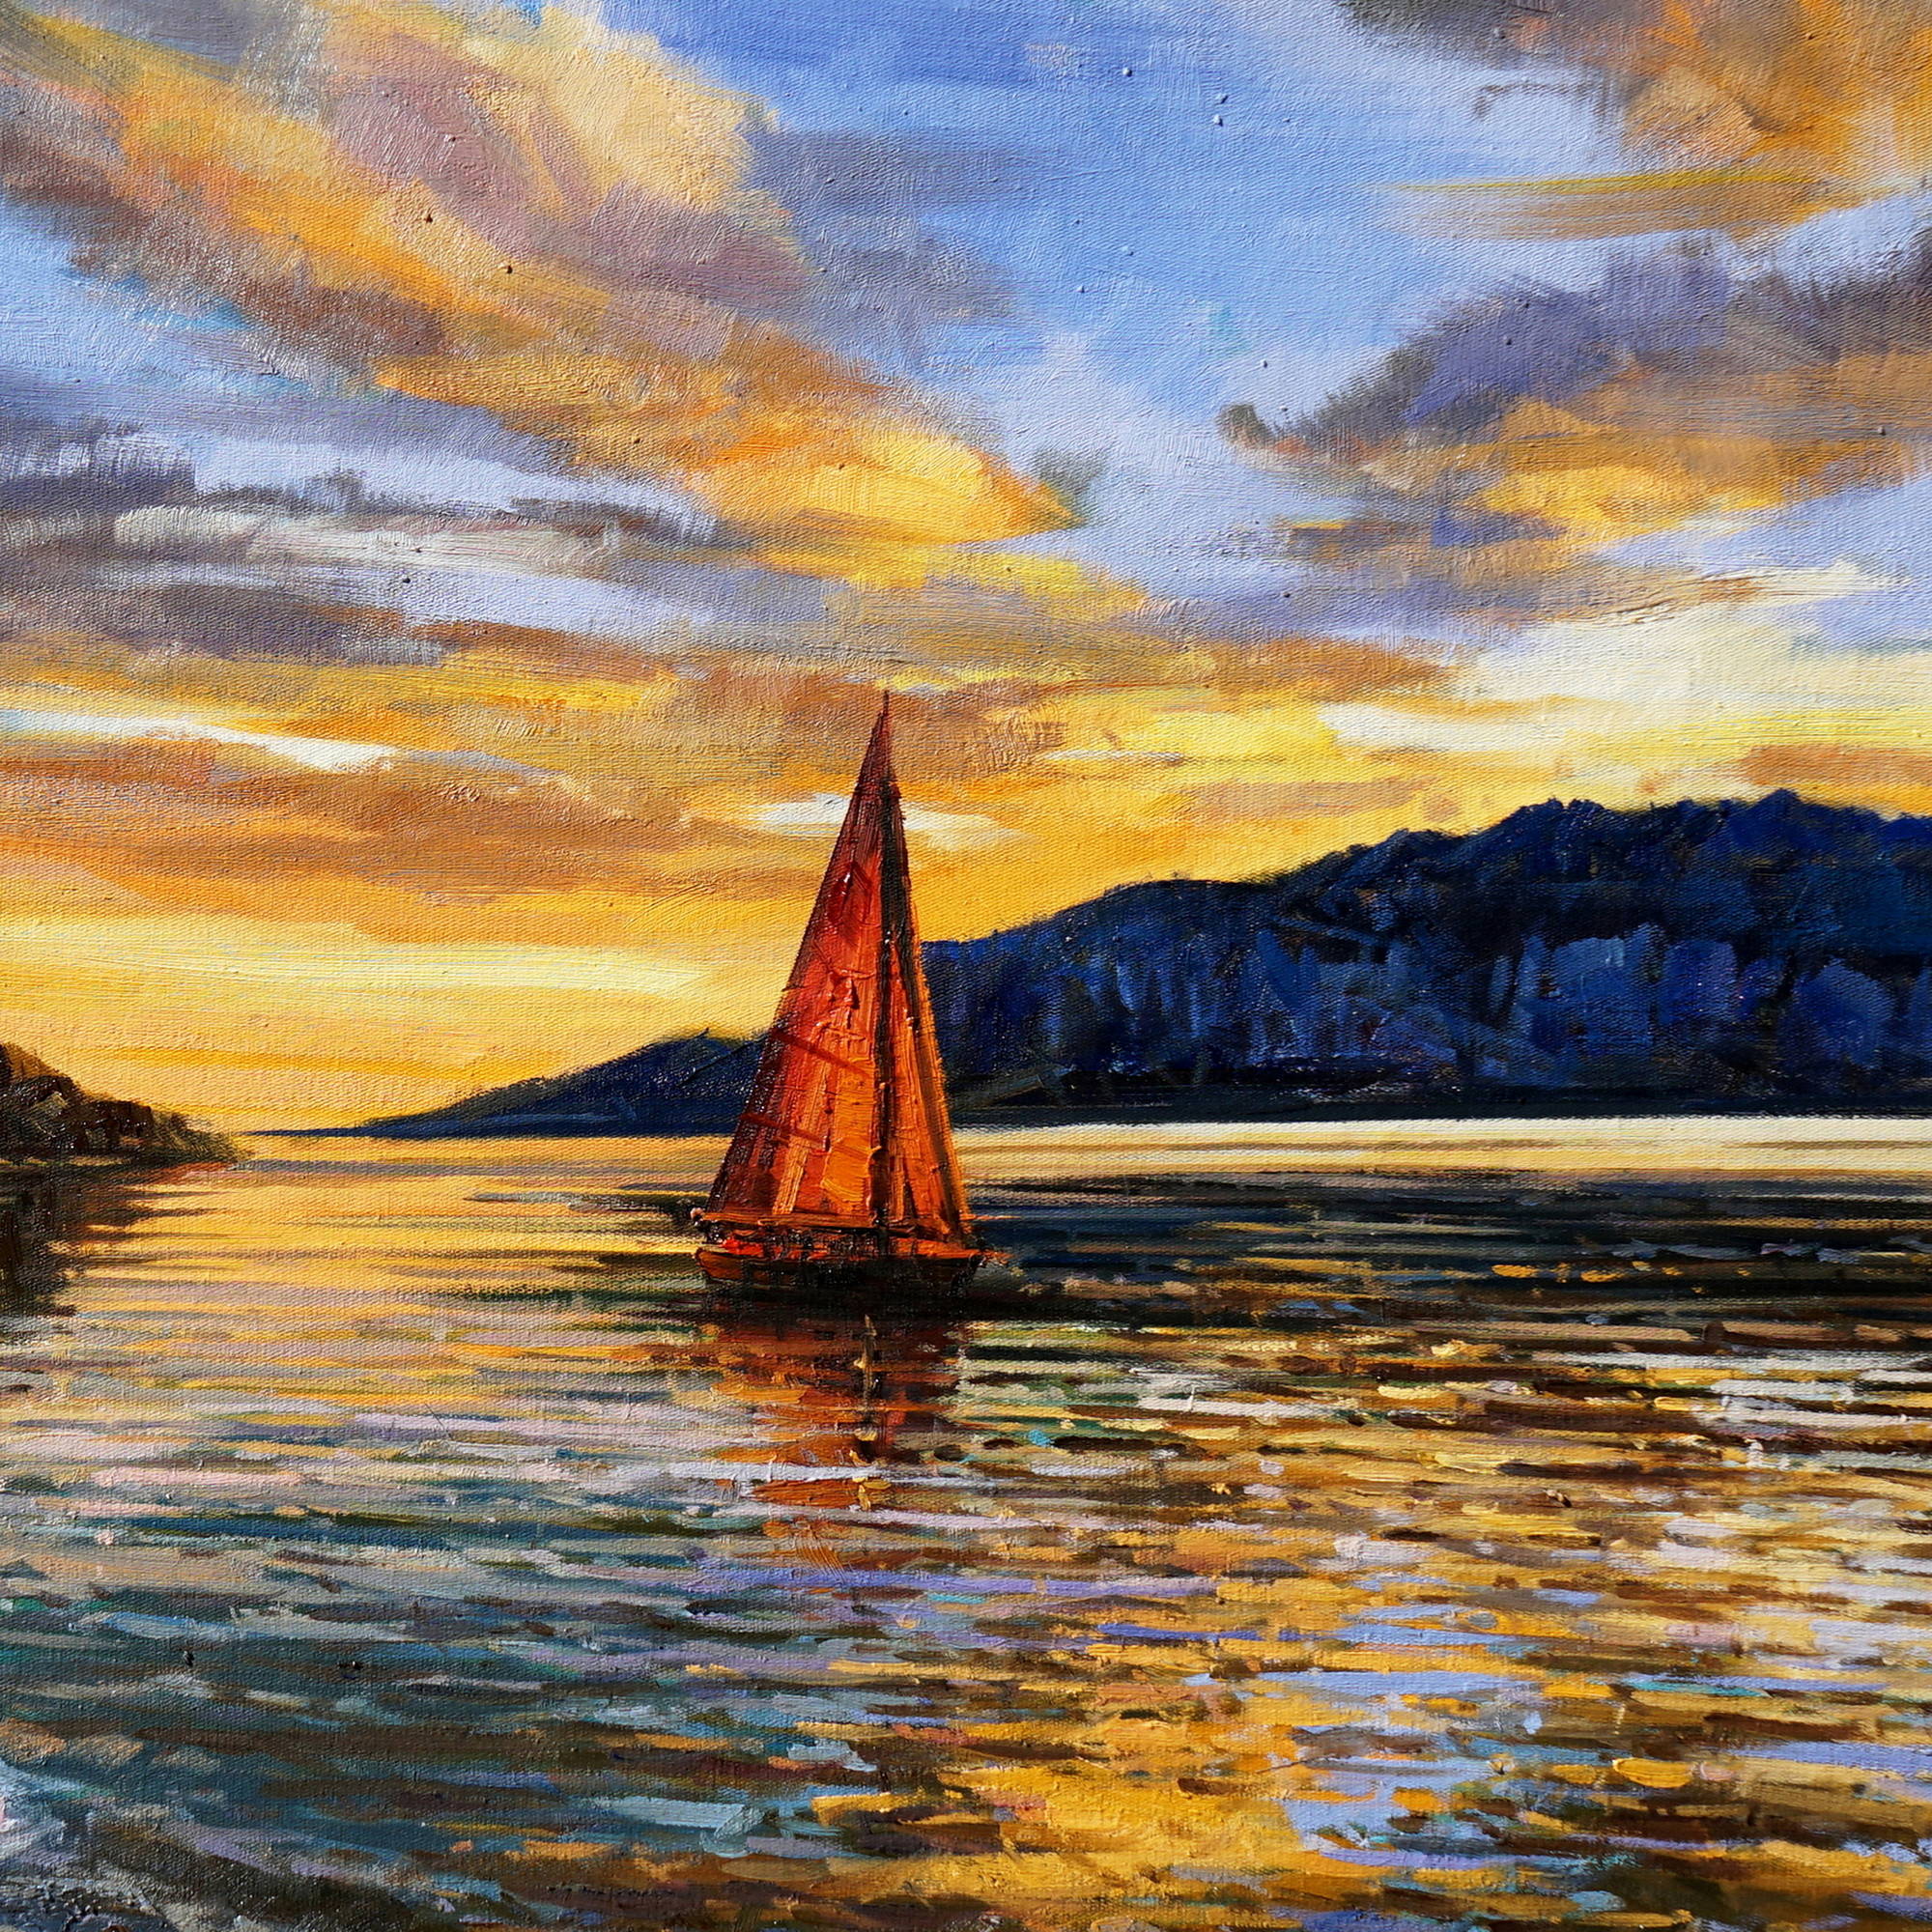 Hand painted Malcesine at sunset 75x115cm